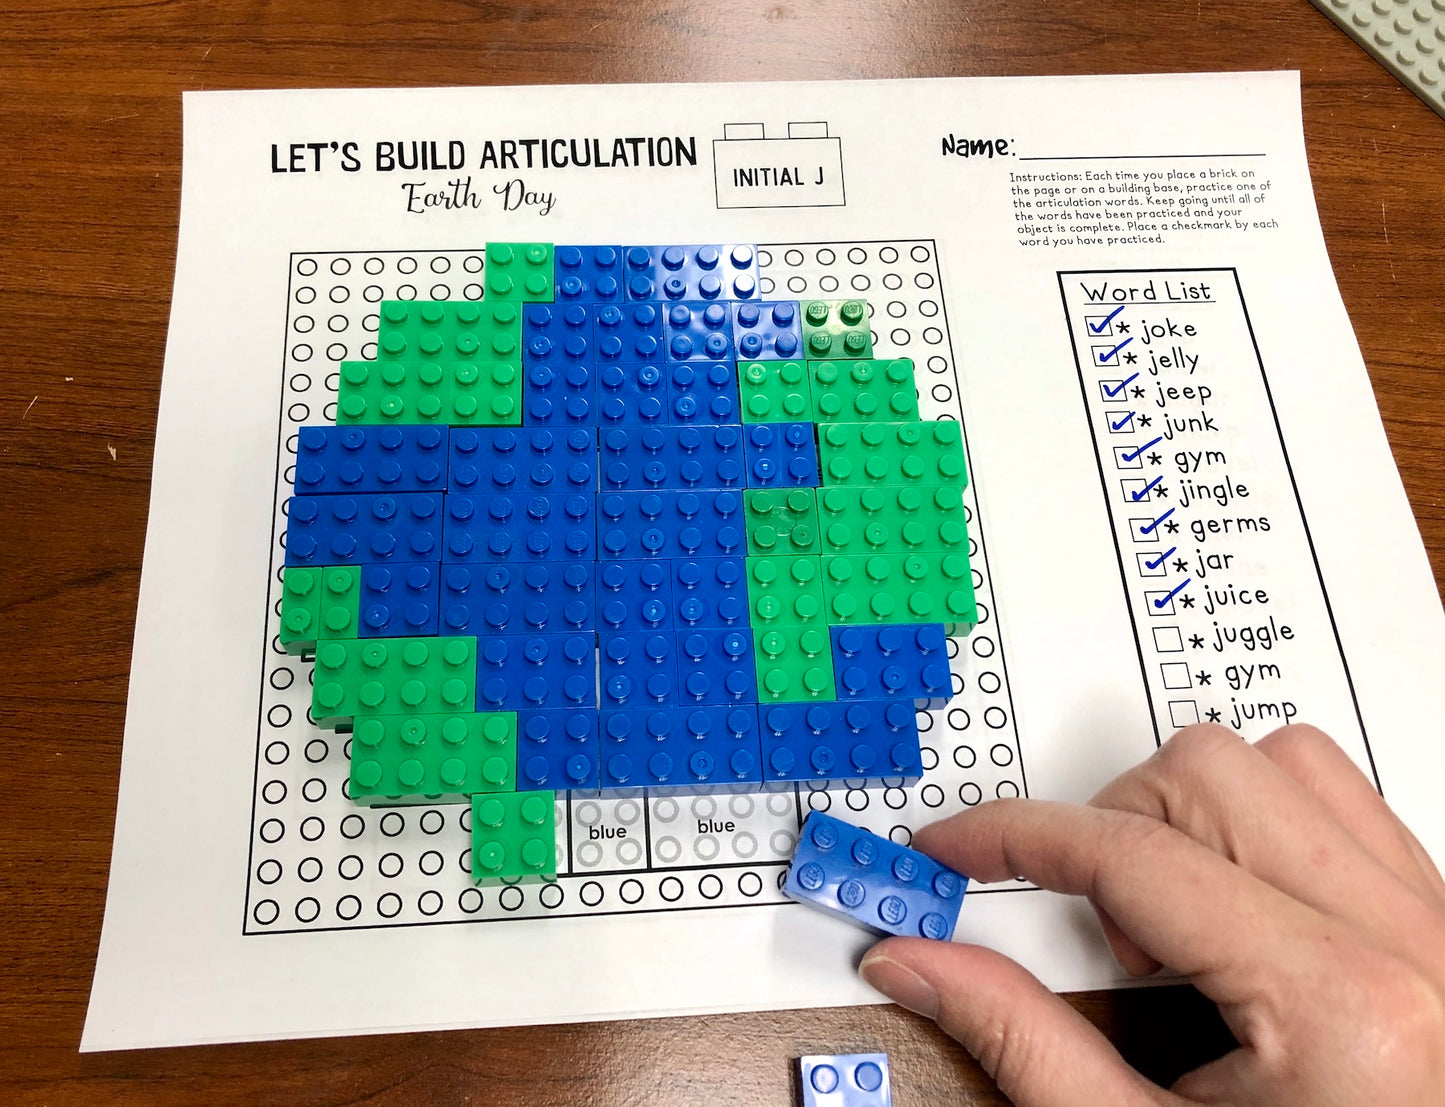 Let's Build Articulation (Word lists)! Earth Day Building Blocks Toy Companion